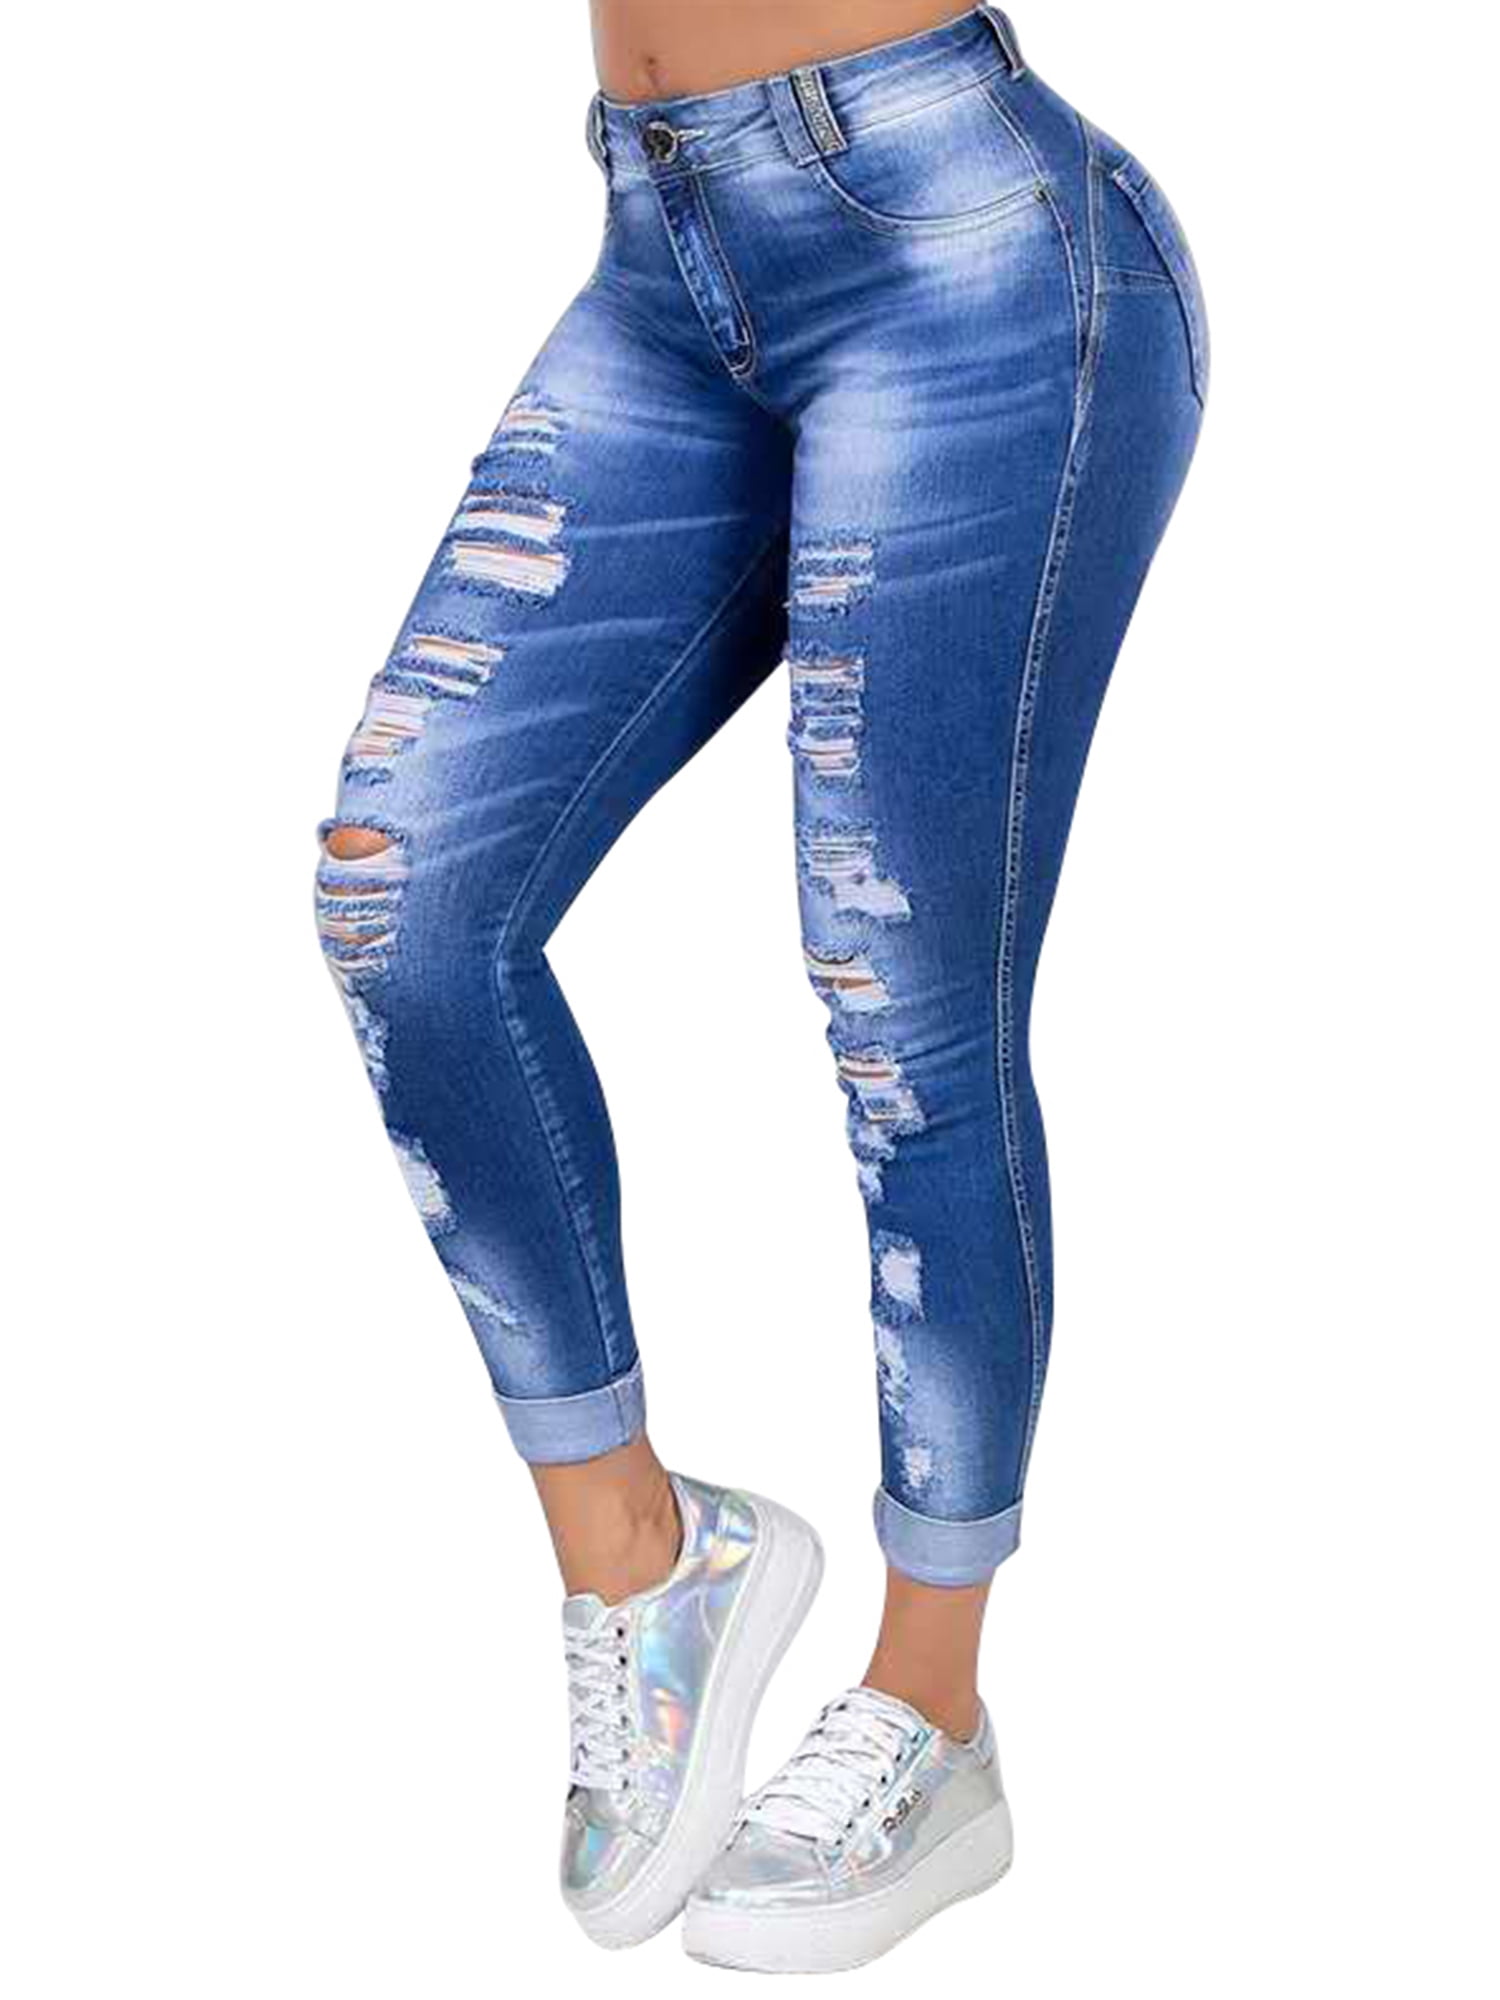 Ripped Distressed Jeans For Women Mid Rise Skinny Slim Fit Jeans Ladies ...